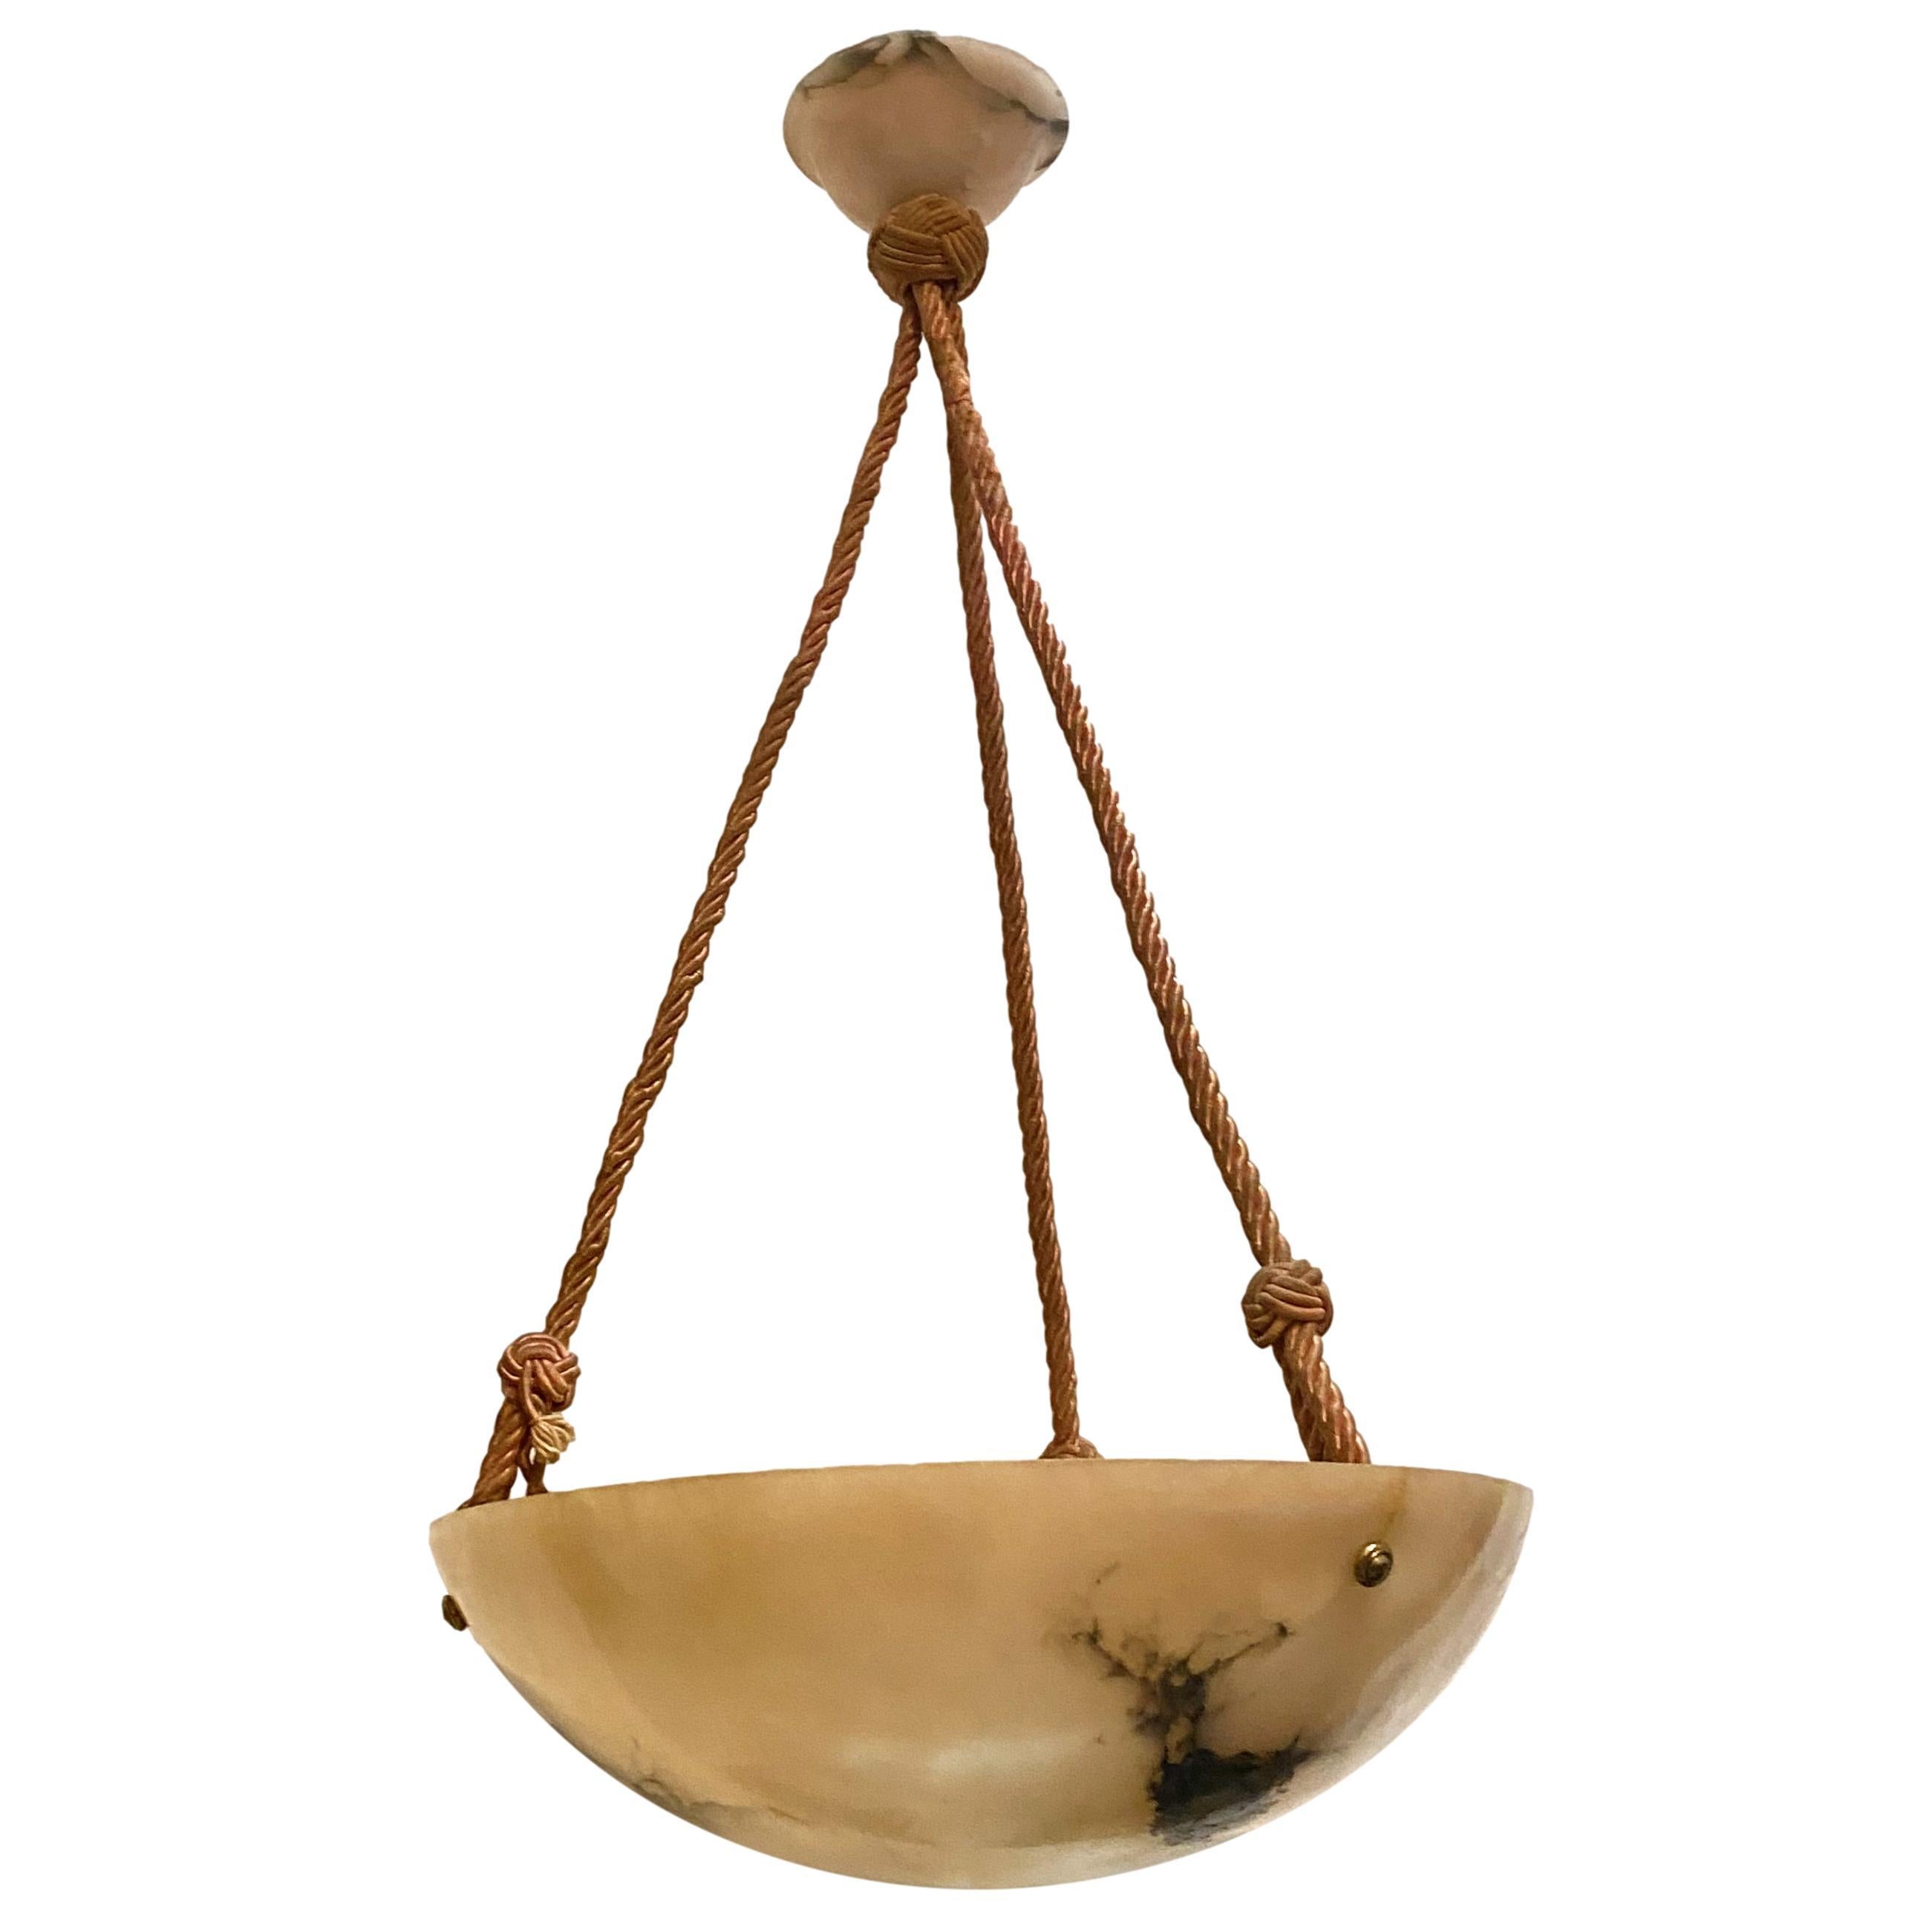 A circa 1920's hand carved Italian alabaster light fixture with silk cords but can be retro-fitted with chain.

Measurements:
Diameter 14